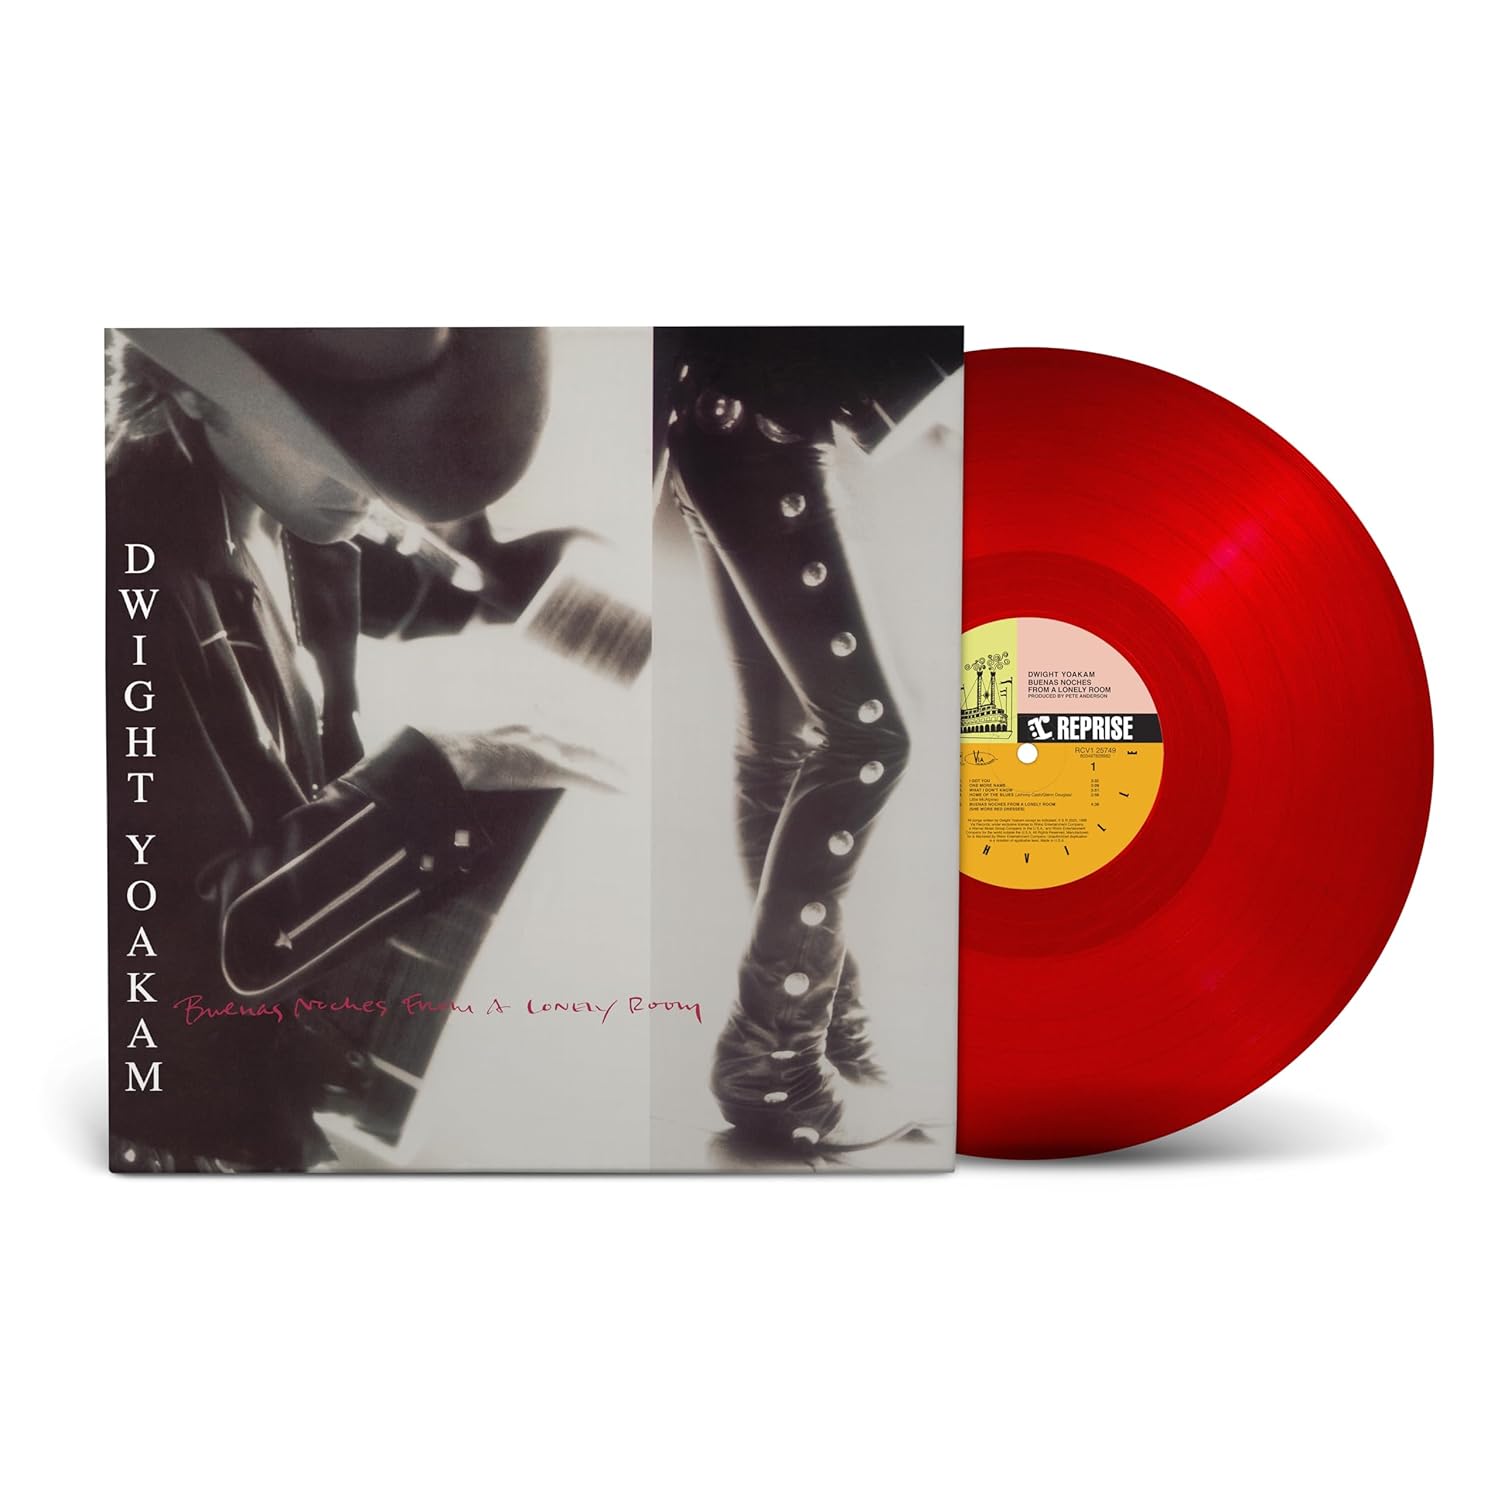 YOAKAM DWIGHT – BUENAS NOCHES FROM A LONELY ROOM  colored vinyl LP